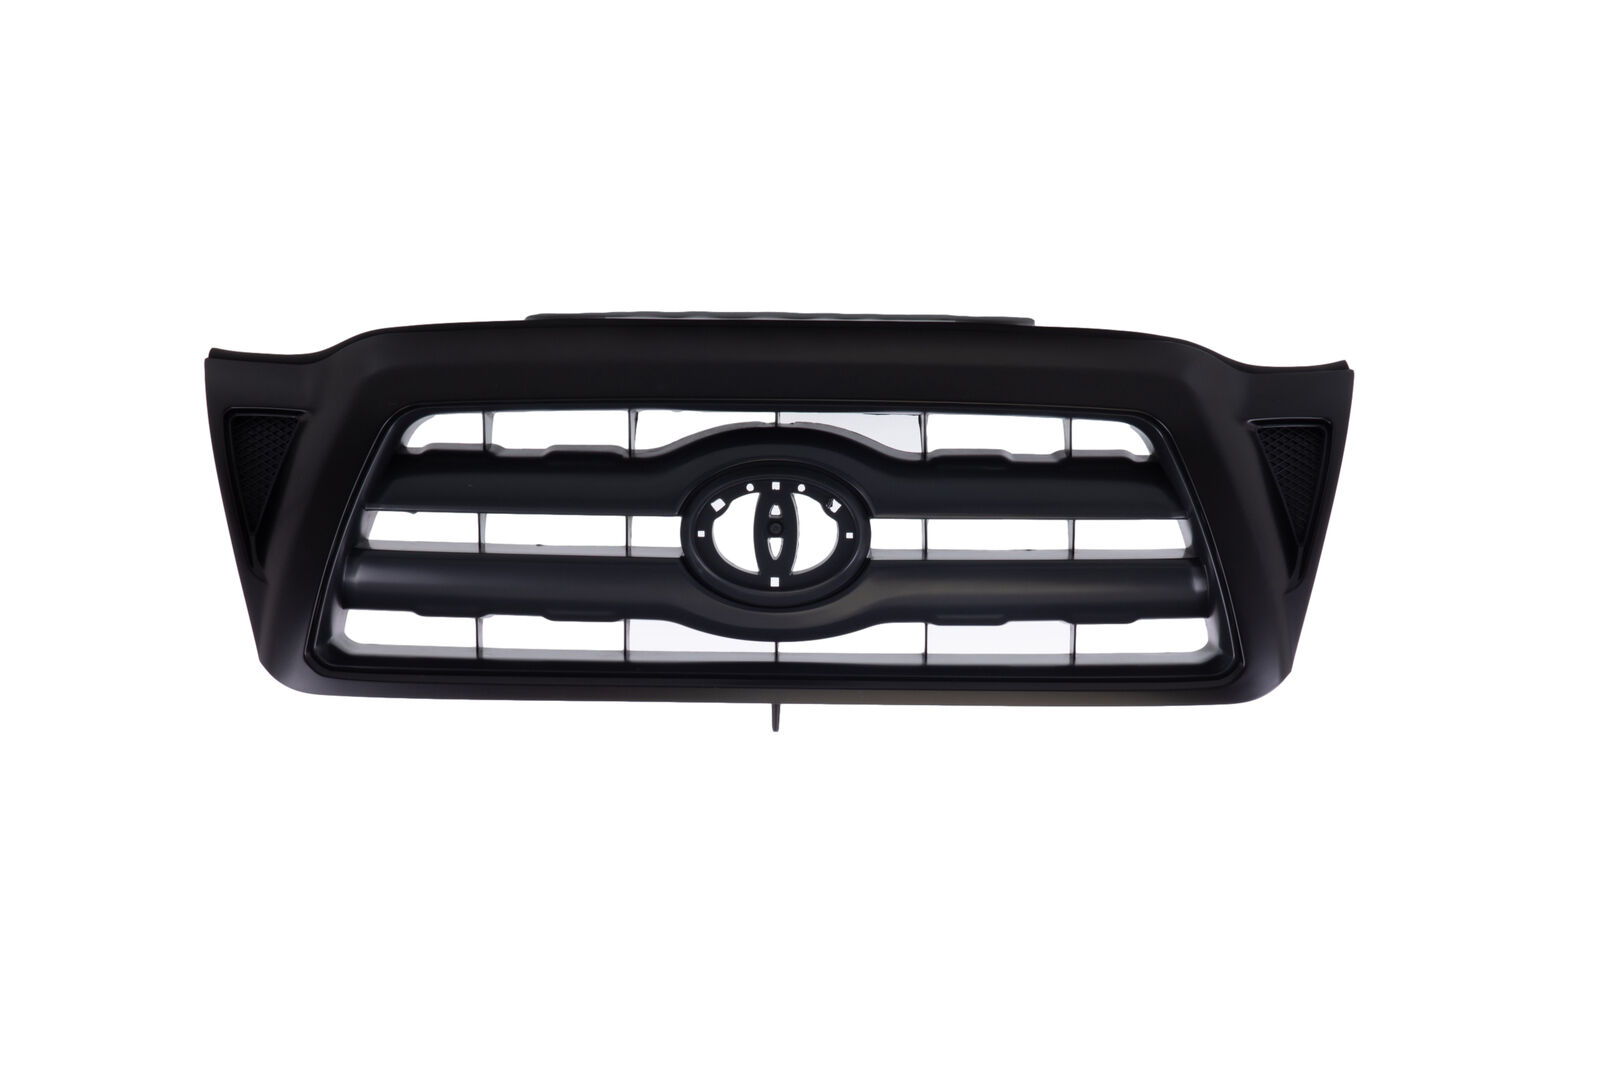 Full Black Grille Grill For Toyota Tacoma Pickup Truck TO1200269